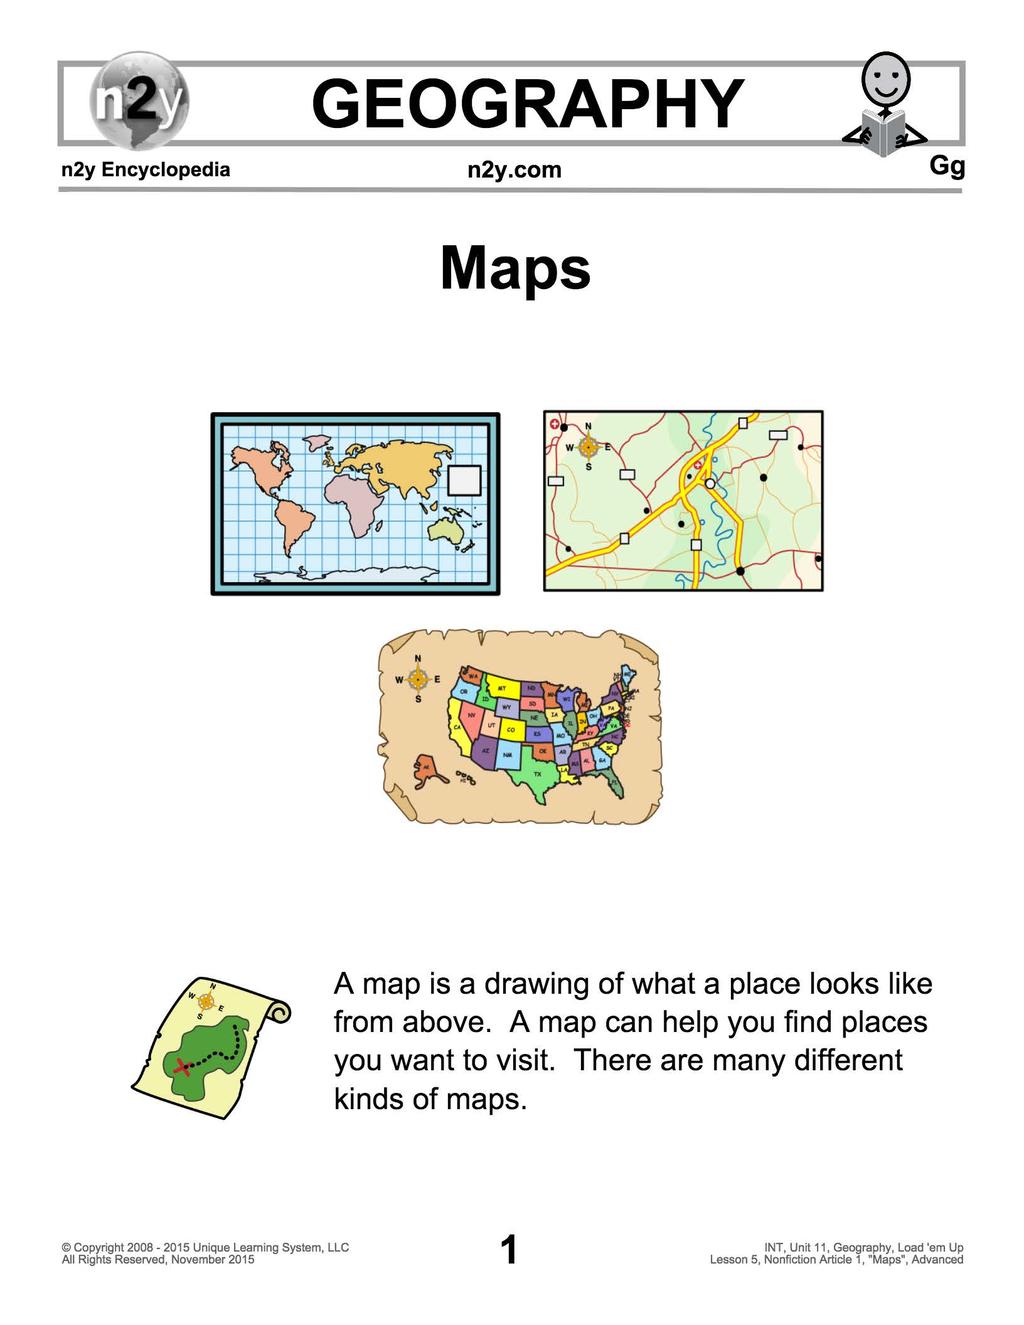 n2y Encyclopedia GEOGRAPHY n2y.com Gg Maps W E s A map is a drawing of what a place looks like from above.